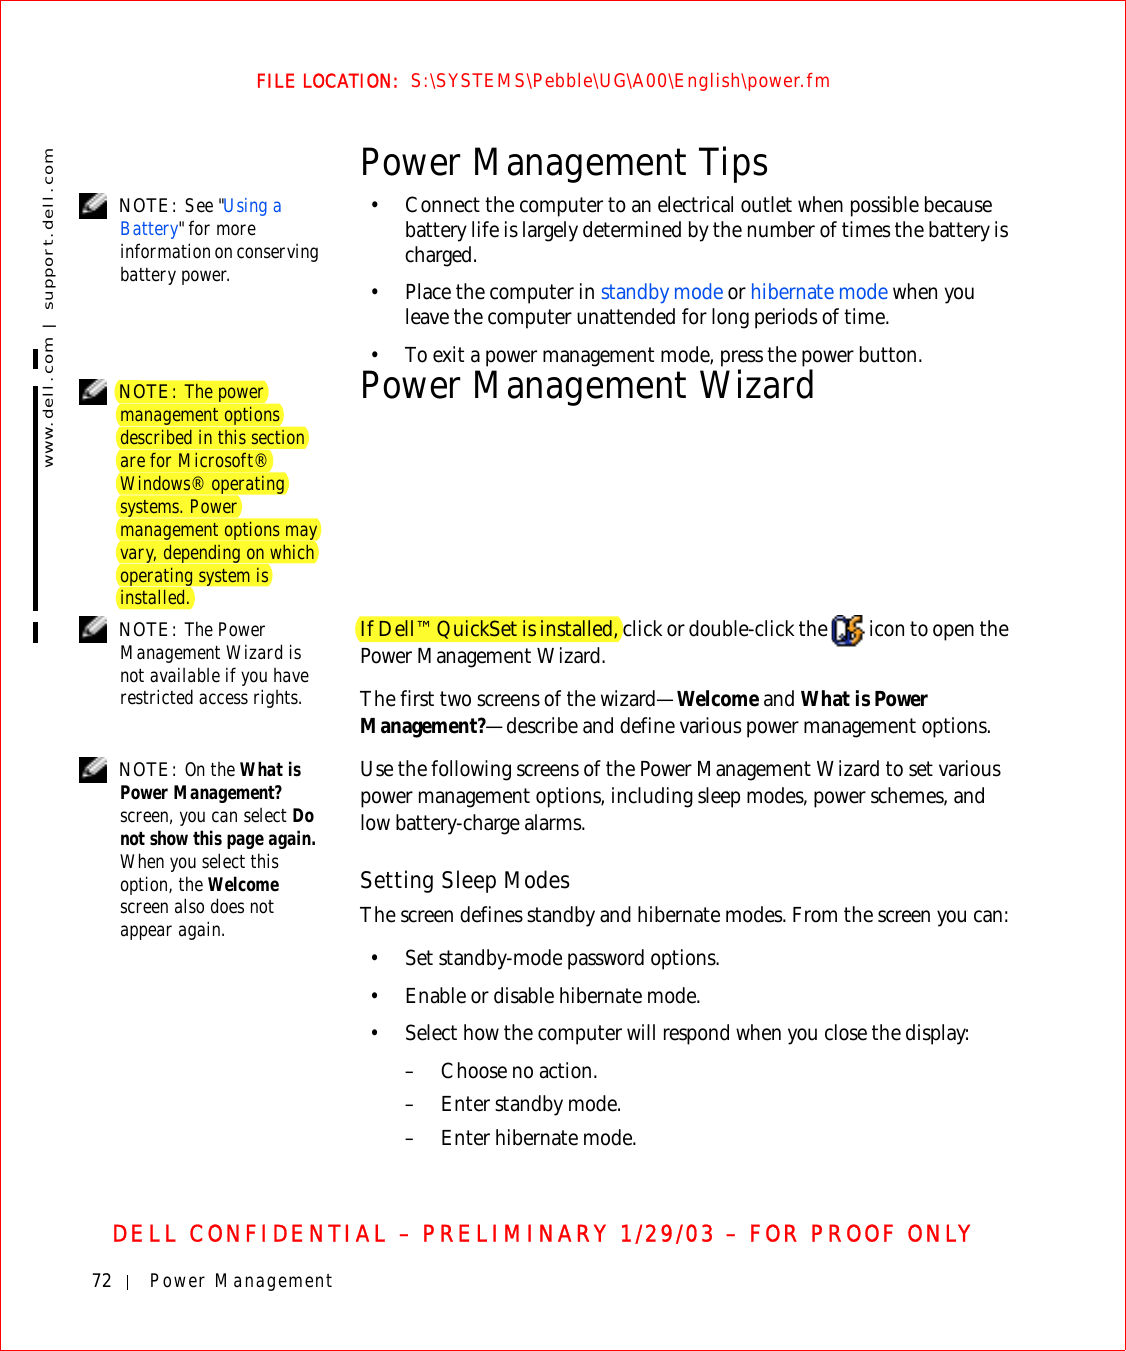 72 Power Managementwww.dell.com | support.dell.comFILE LOCATION:  S:\SYSTEMS\Pebble\UG\A00\English\power.fmDELL CONFIDENTIAL – PRELIMINARY 1/29/03 – FOR PROOF ONLYPower Management Tips NOTE: See &quot;Using a Battery&quot; for more information on conserving battery power.• Connect the computer to an electrical outlet when possible because battery life is largely determined by the number of times the battery is charged.• Place the computer in standby mode or hibernate mode when you leave the computer unattended for long periods of time.• To exit a power management mode, press the power button. NOTE: The power management options described in this section are for Microsoft® Windows® operating systems. Power management options may vary, depending on which operating system is installed.Power Management Wizard NOTE: The Power Management Wizard is not available if you have restricted access rights.If Dell™ QuickSet is installed, click or double-click the   icon to open the Power Management Wizard.The first two screens of the wizard—Welcome and What is Power Management?—describe and define various power management options. NOTE: On the What is Power Management? screen, you can select Do not show this page again. When you select this option, the Welcome screen also does not appear again.Use the following screens of the Power Management Wizard to set various power management options, including sleep modes, power schemes, and low battery-charge alarms.Setting Sleep ModesThe screen defines standby and hibernate modes. From the screen you can:• Set standby-mode password options.• Enable or disable hibernate mode.• Select how the computer will respond when you close the display:– Choose no action.–Enter standby mode.– Enter hibernate mode.